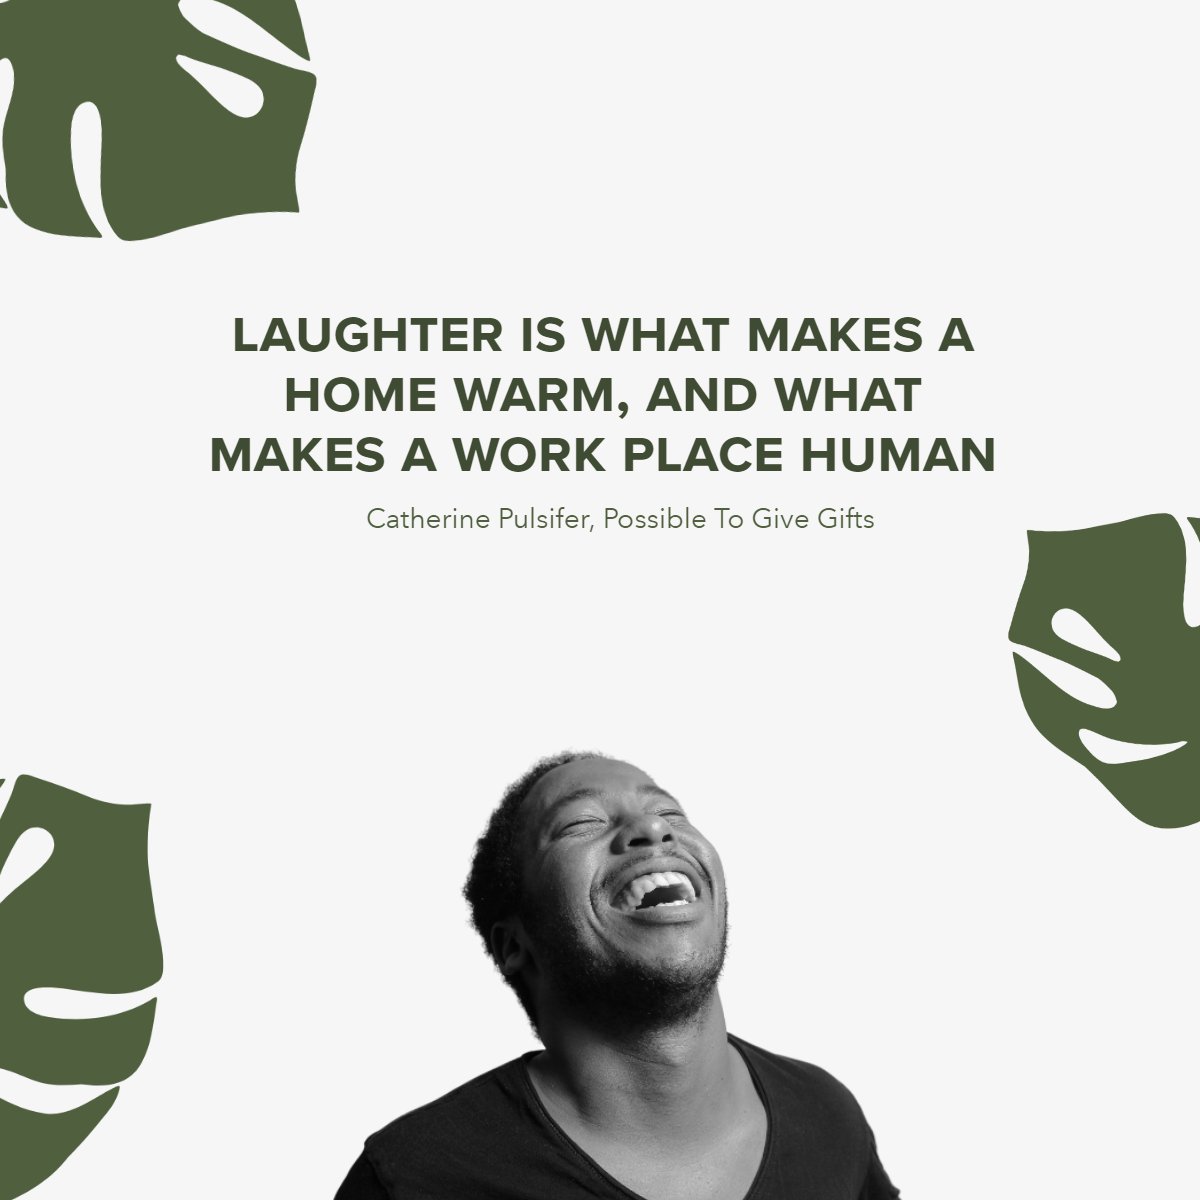 'Laughter is what makes a home warm, and what makes a work place human.' 
― Catherine Pulsifer

#quoteoftheday✏️ #quotestagram #lifequotes #laughter
 #LPTRealty #lptfam #lpttexas #htownrealestate #ctxrealestate #ctxguy #guycourtney